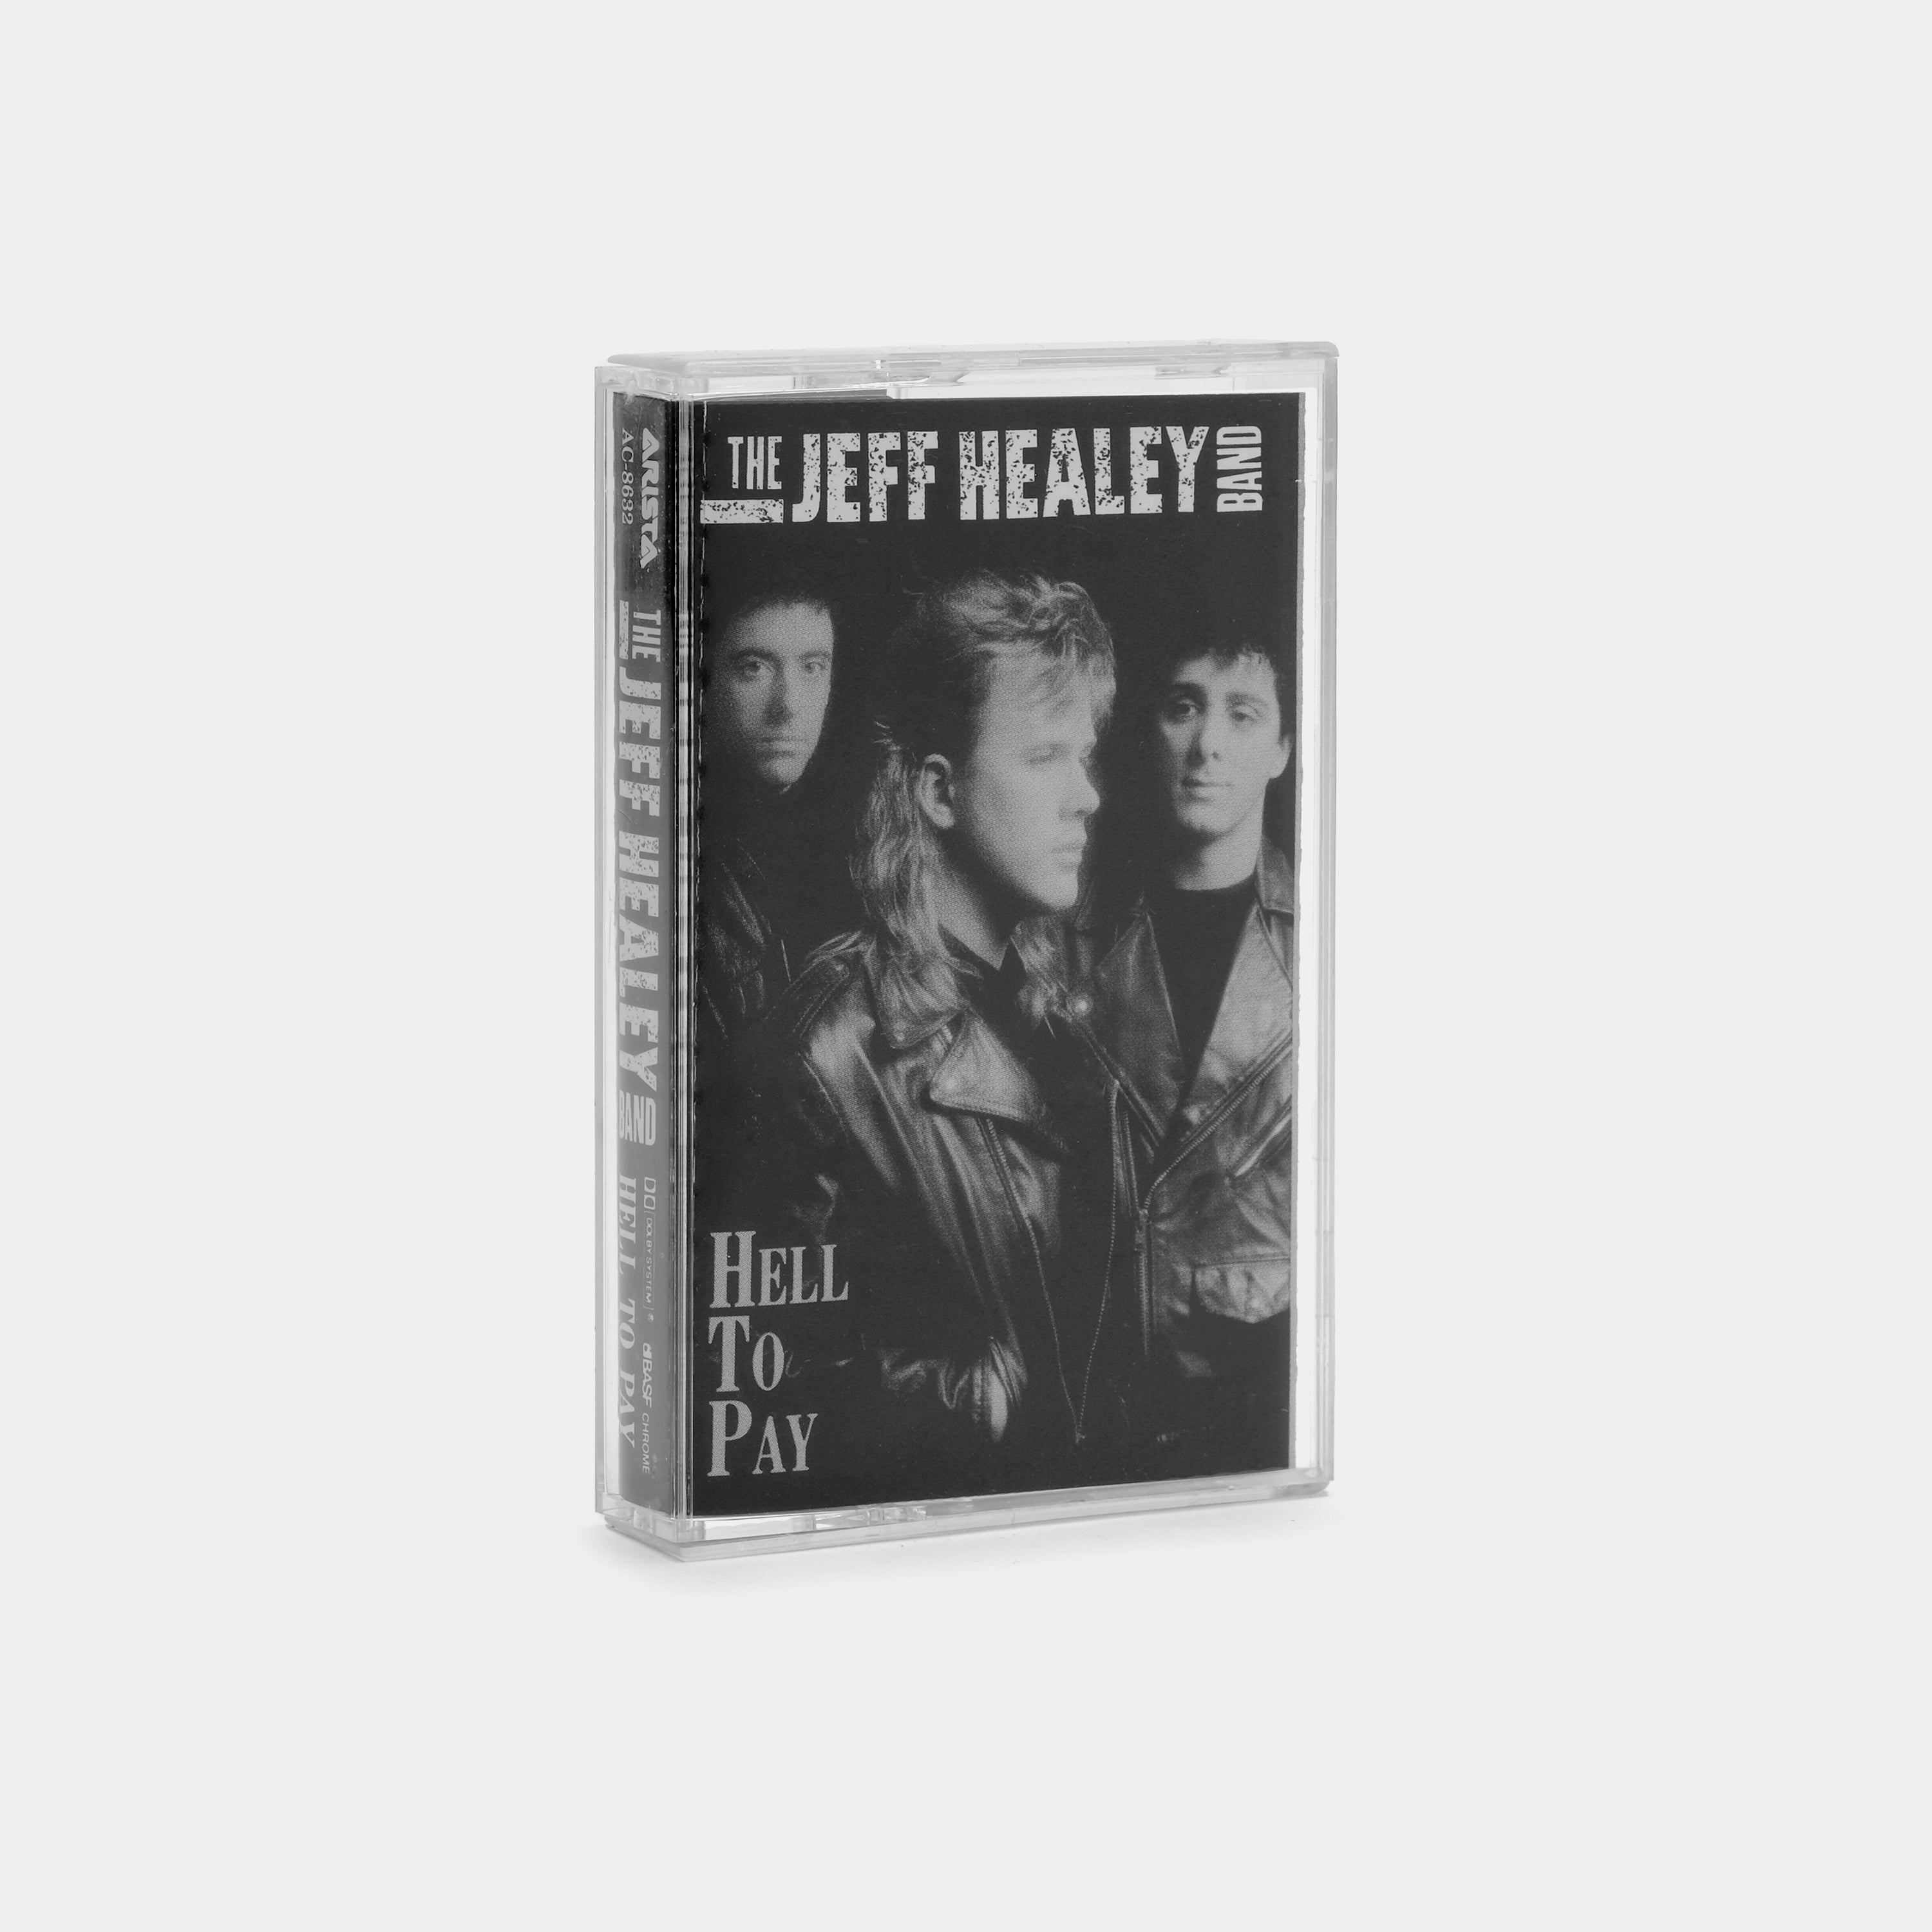 The Jeff Healey Band - Hell To Pay Cassette Tape